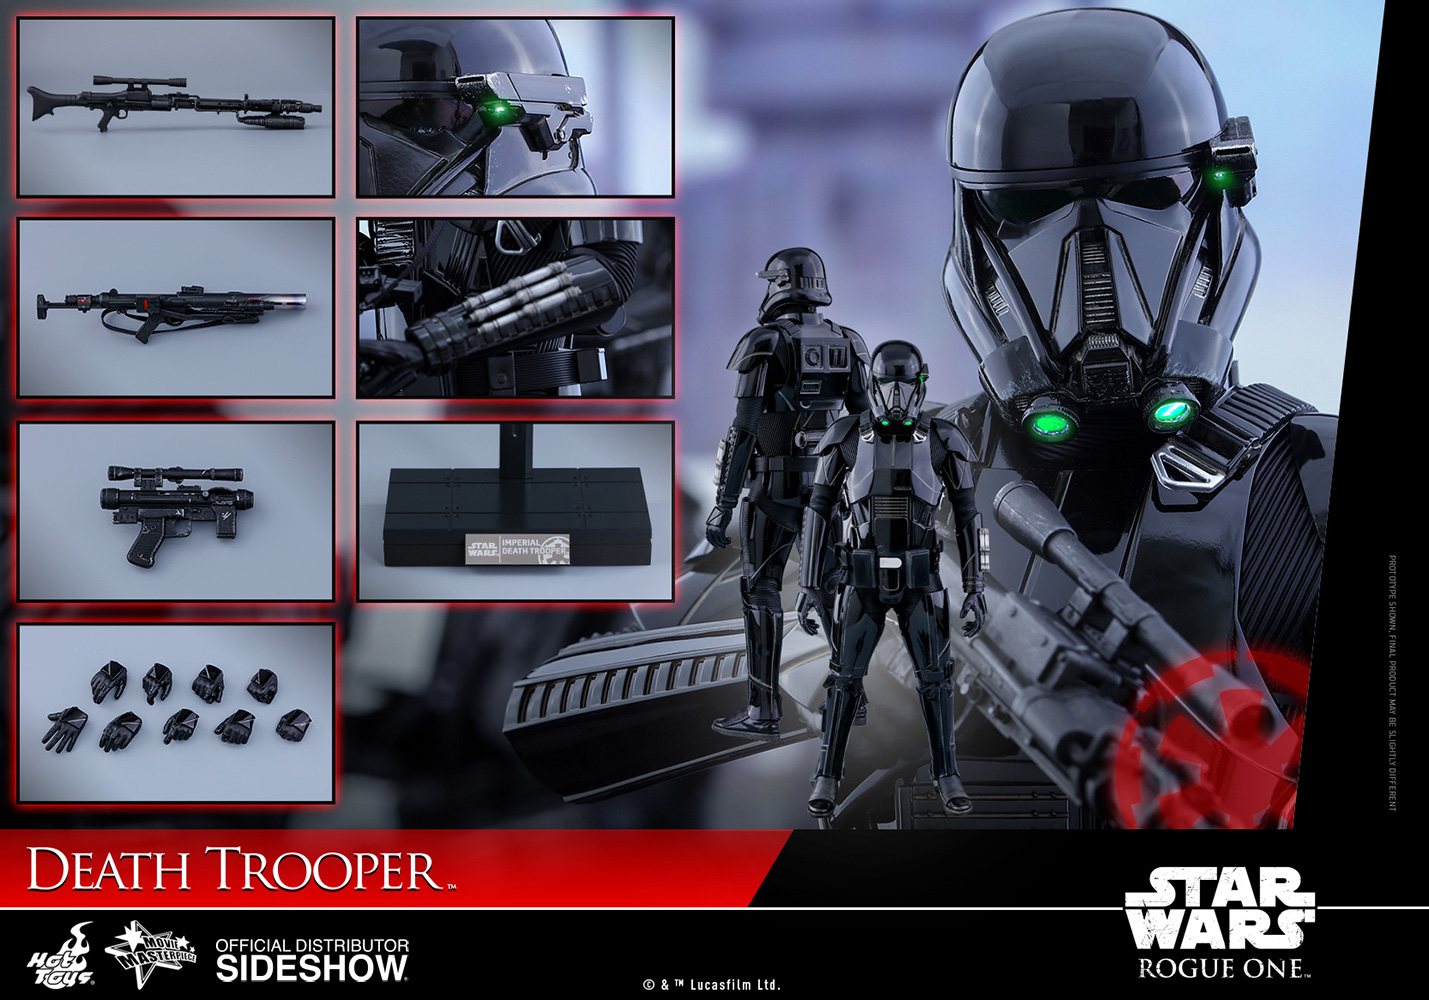 hot toys death trooper deluxe